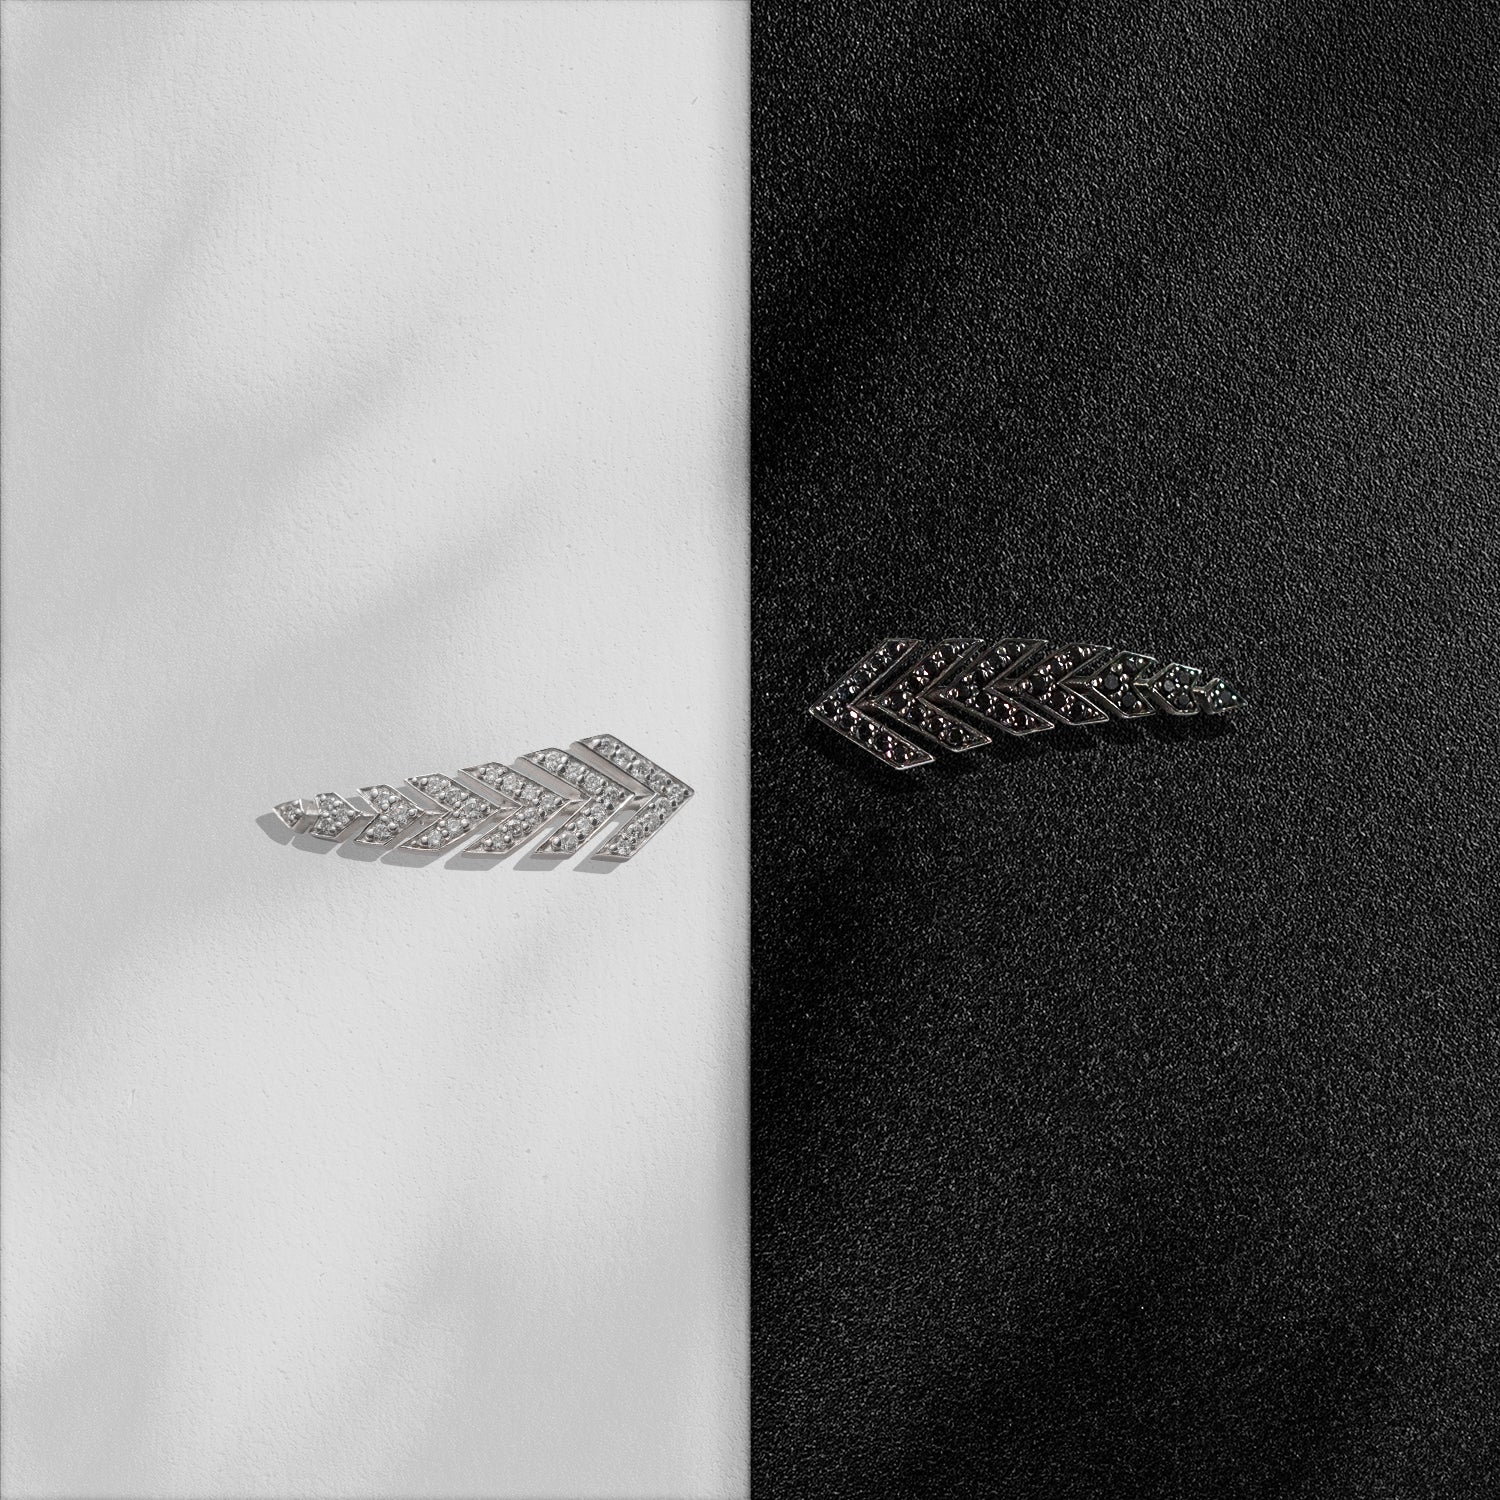 ILA SODHANI Sasha Earring comes in white gold, on the left with white diamonds, and black rhodium, with black diamonds, on the right.